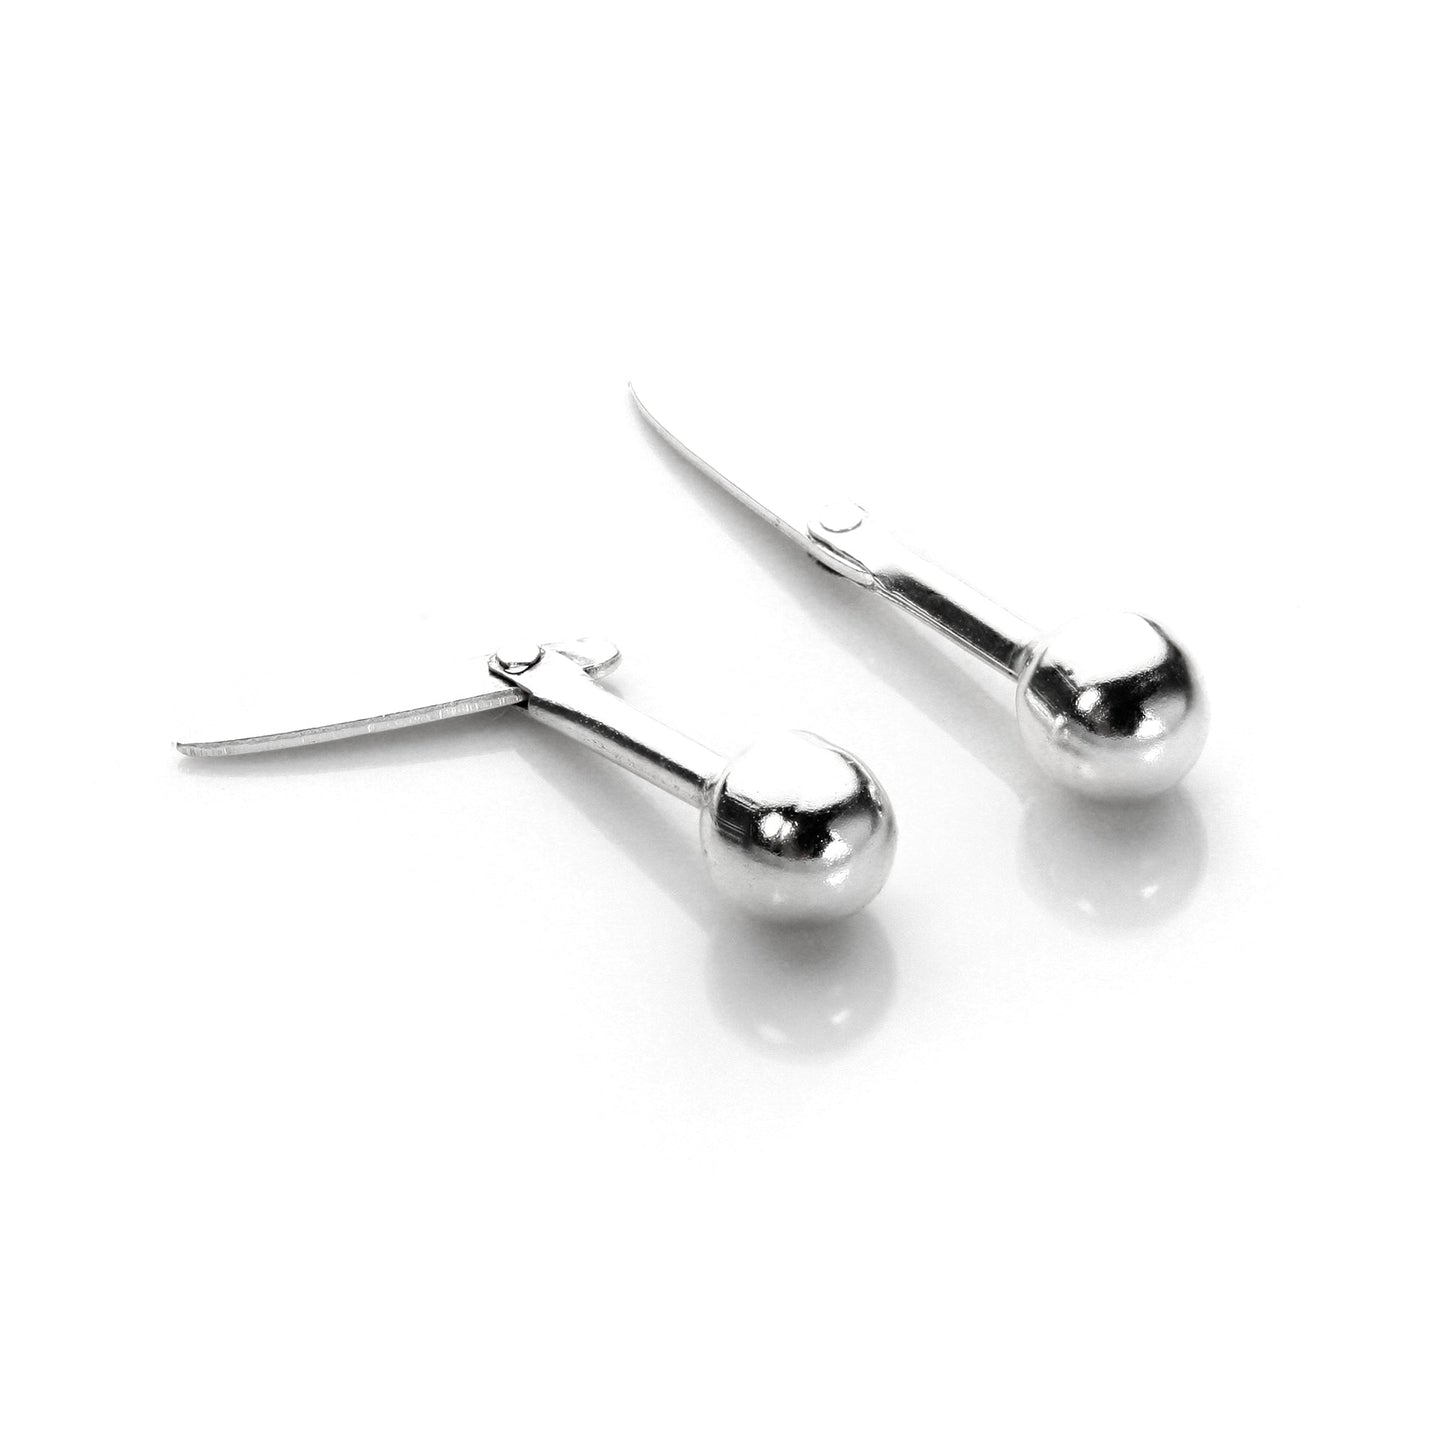 Sterling Silver Andralok Ball Stud Earrings 3mm - 6mm